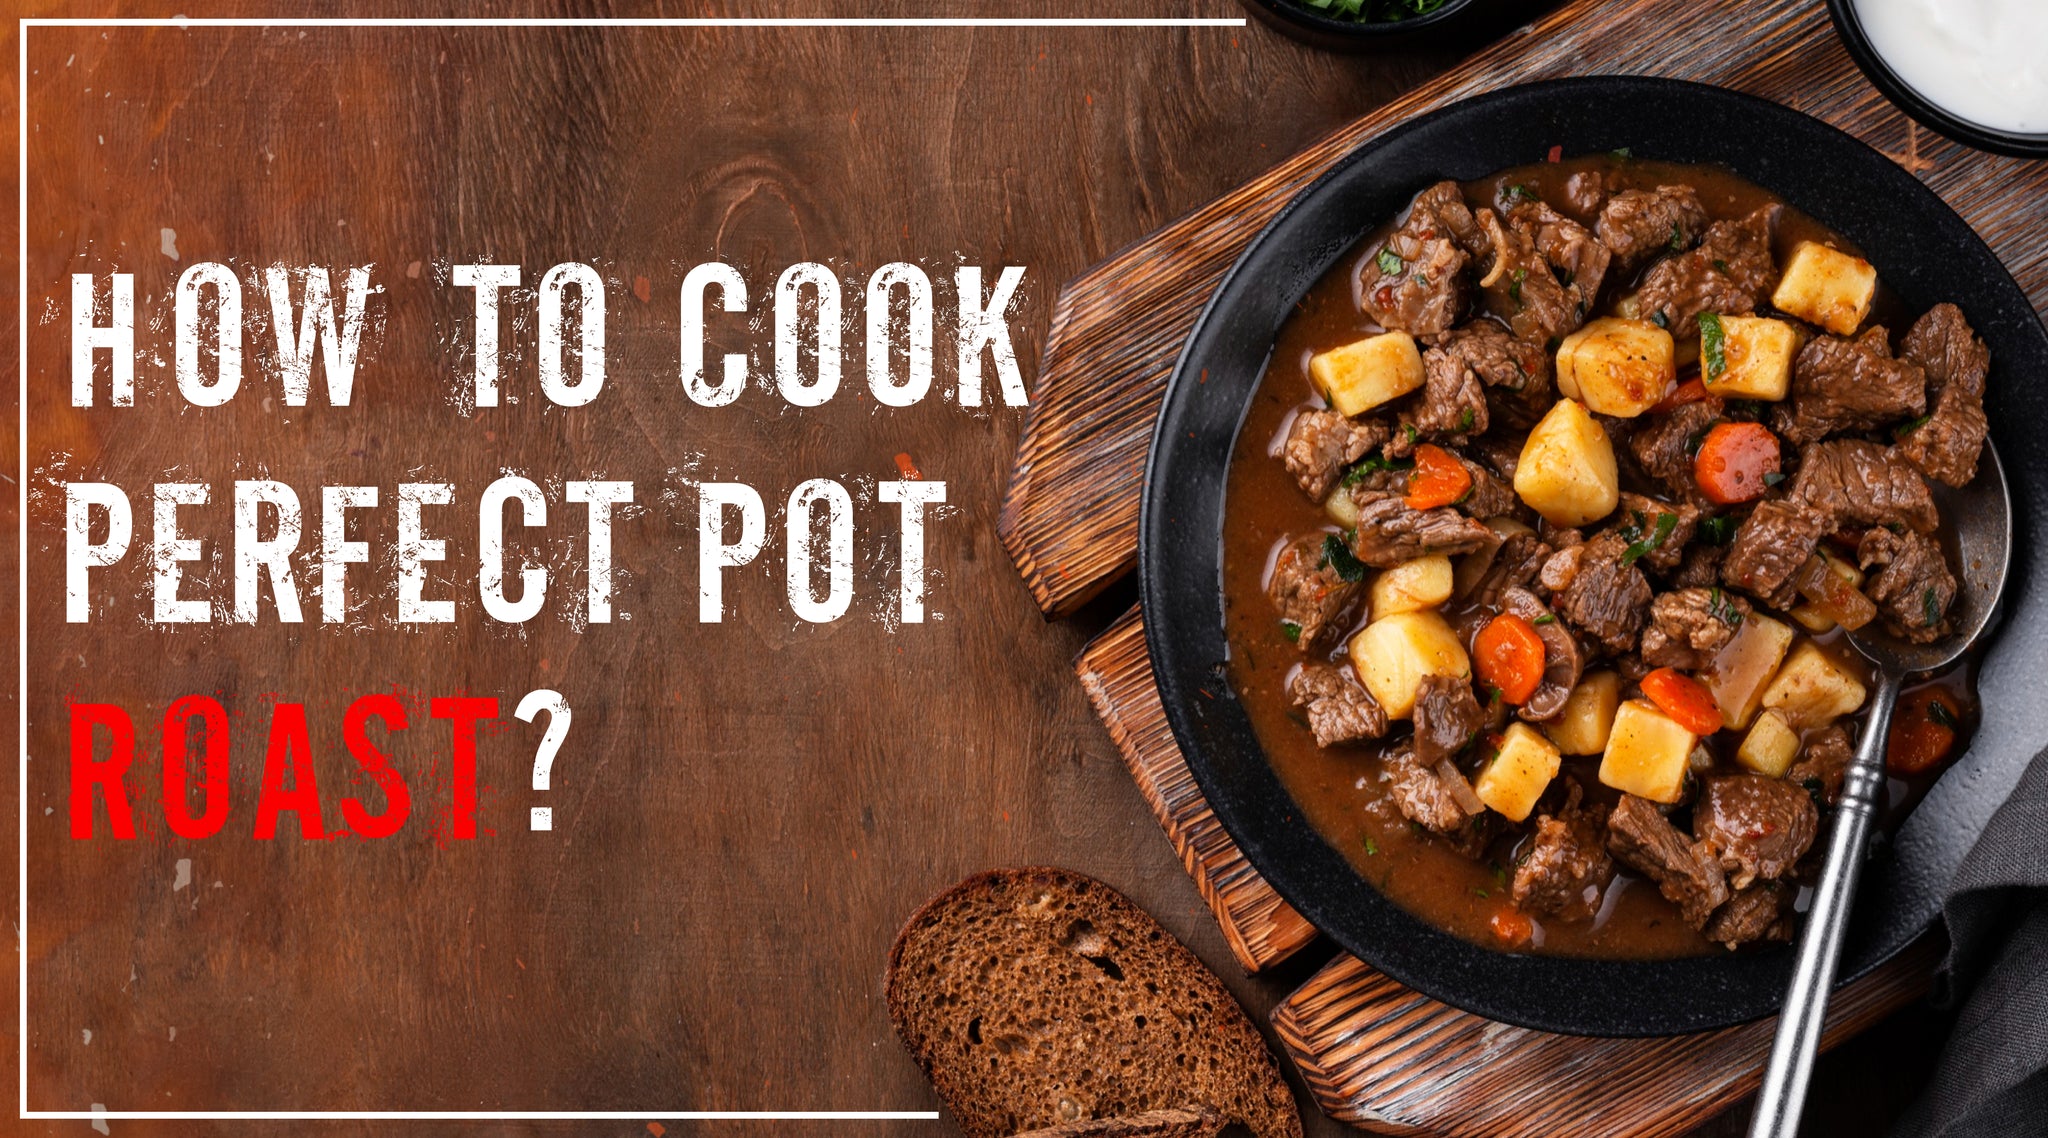 How to Cook Perfect Pot Roast?